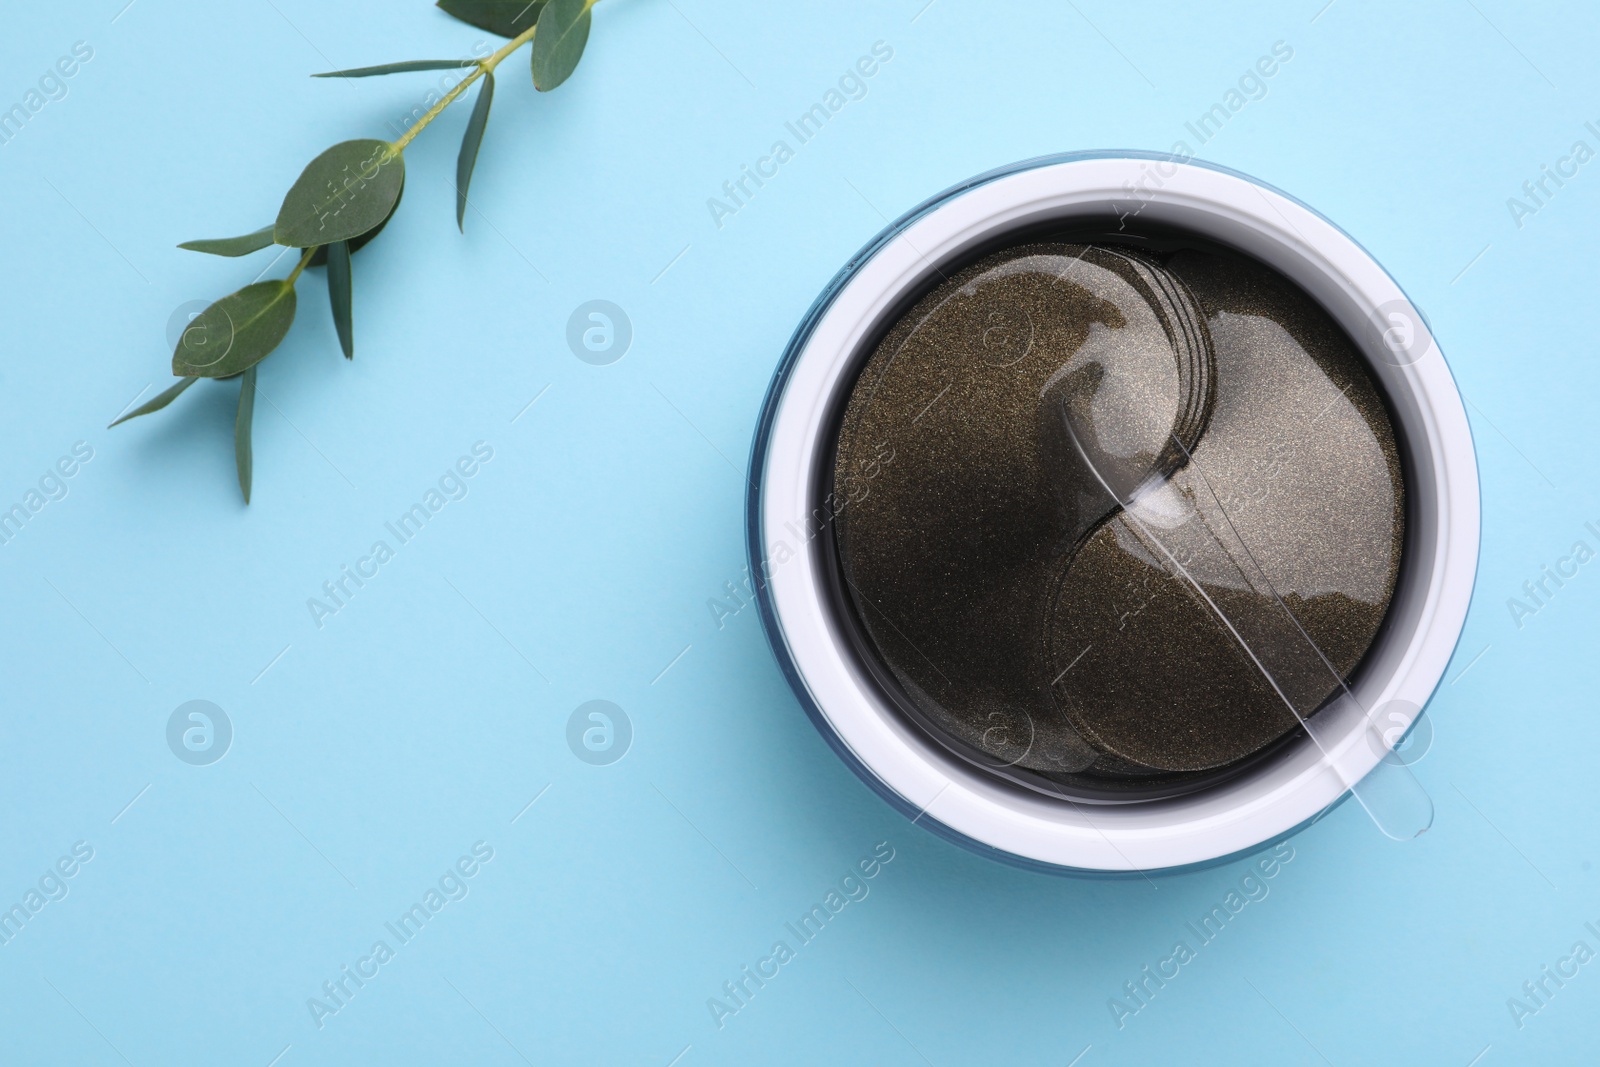 Photo of Under eye patches in jar with spatula and green twig on light blue background, flat lay. Cosmetic product